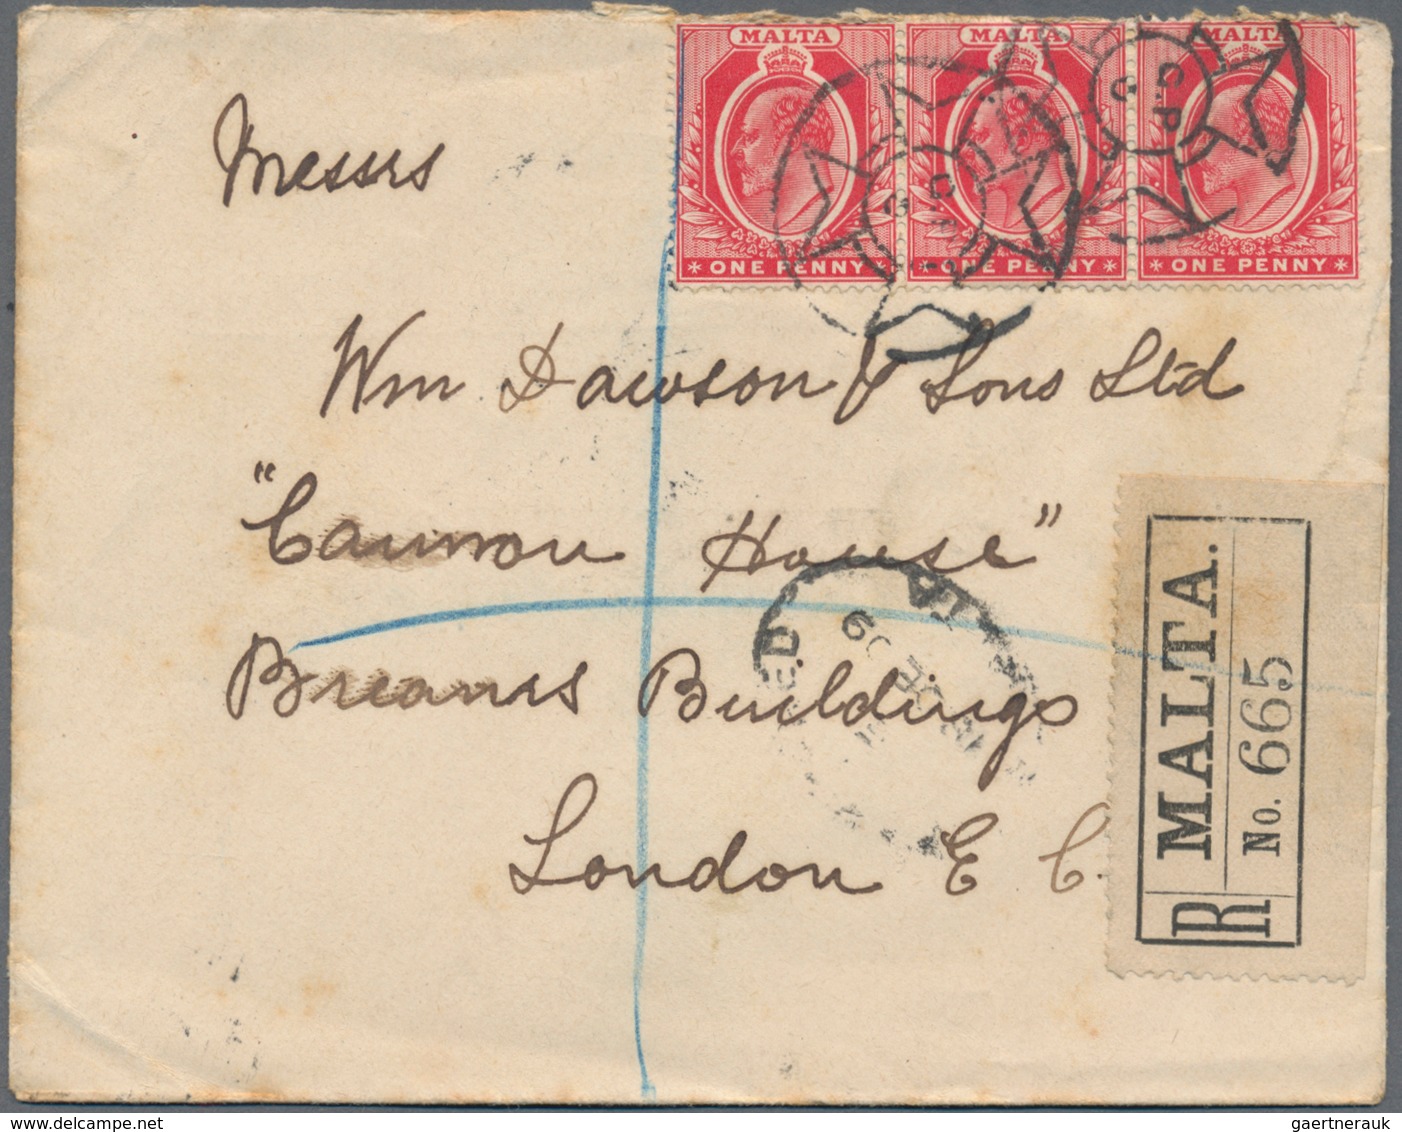 Malta: 1886/2001 ca. 260 letters, cards, postal stationeries (incl. unfolded wrappers and aerograms)